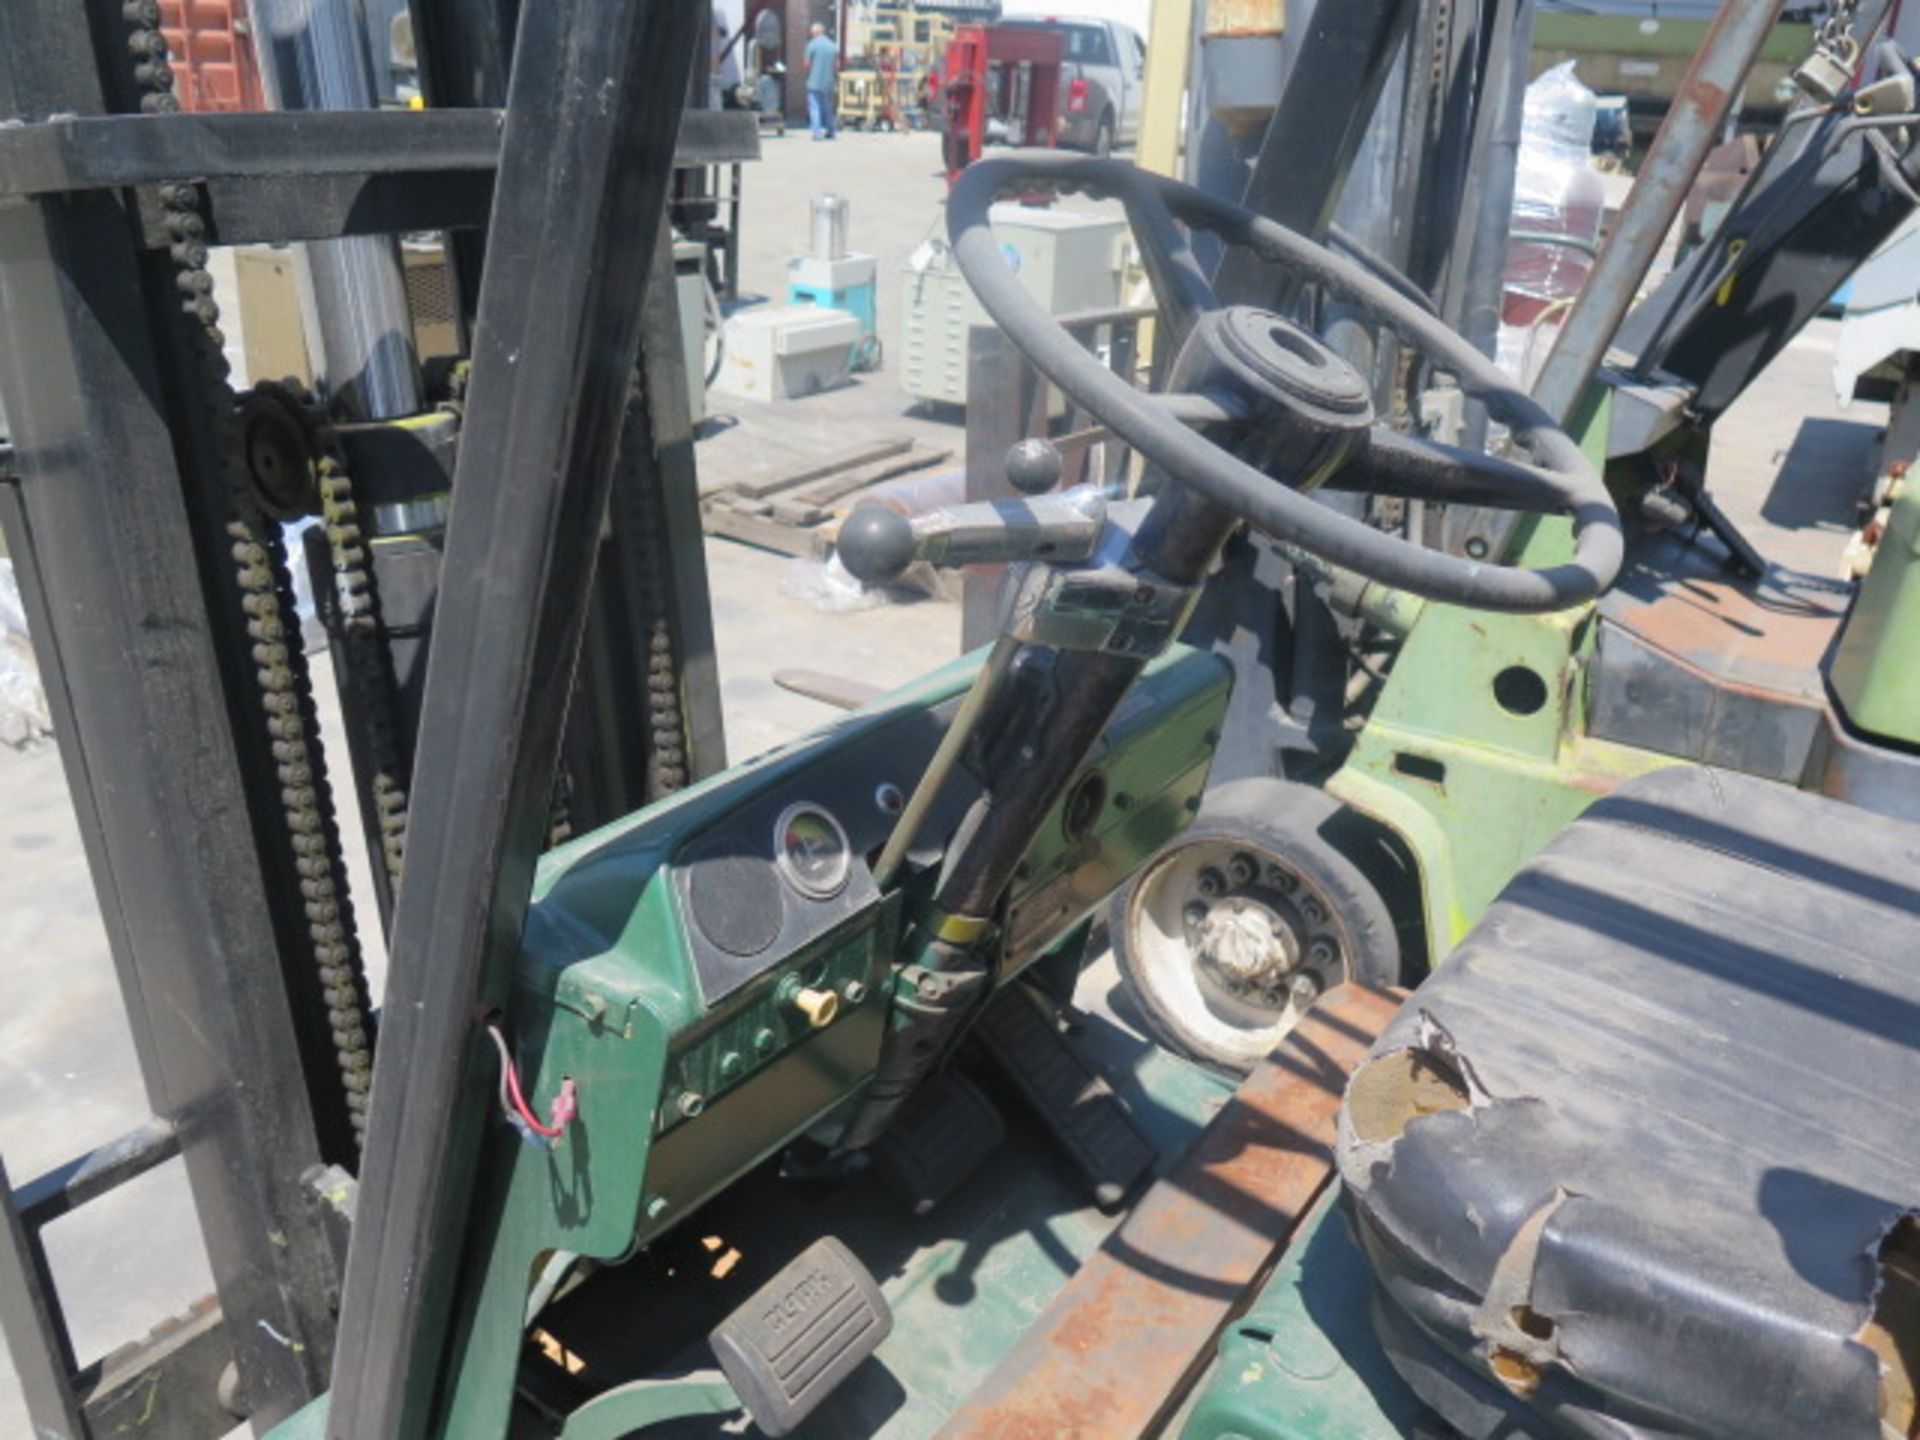 Clark C500-30 2500 Lb Cap LPG Forklift s/n 235-224-5150 w/ 3-Stage Mast, 170” Lift Height, Solid - Image 3 of 6